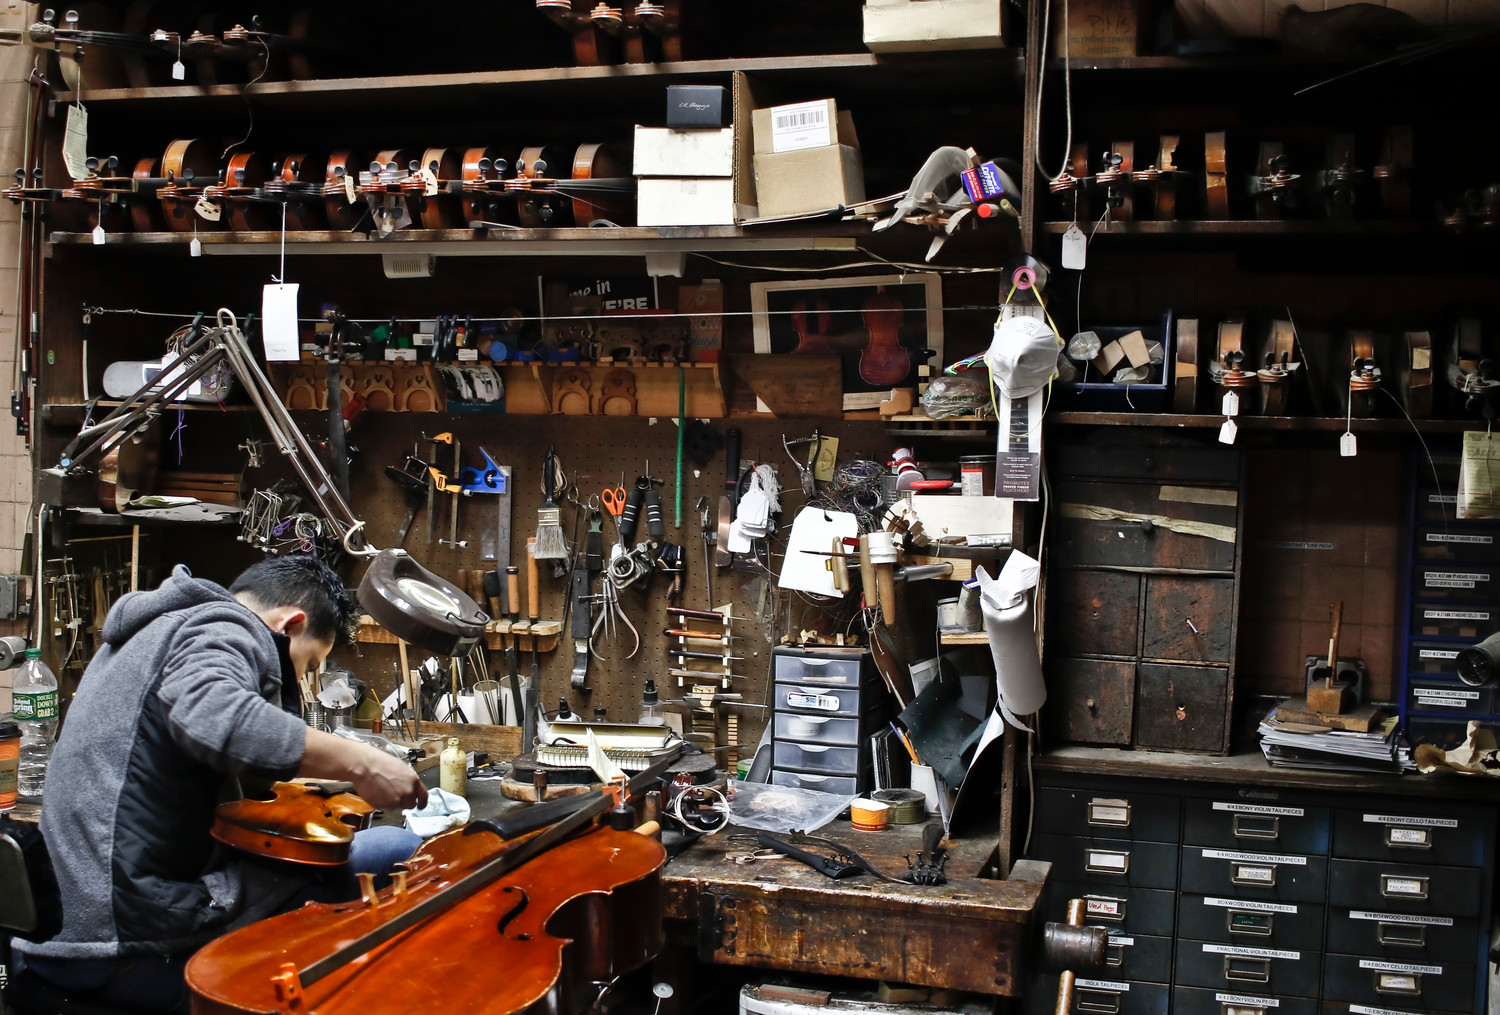 The shop is full of hundreds of tools used to restore instruments. Rigoberto Dubon worked to repair a violin.